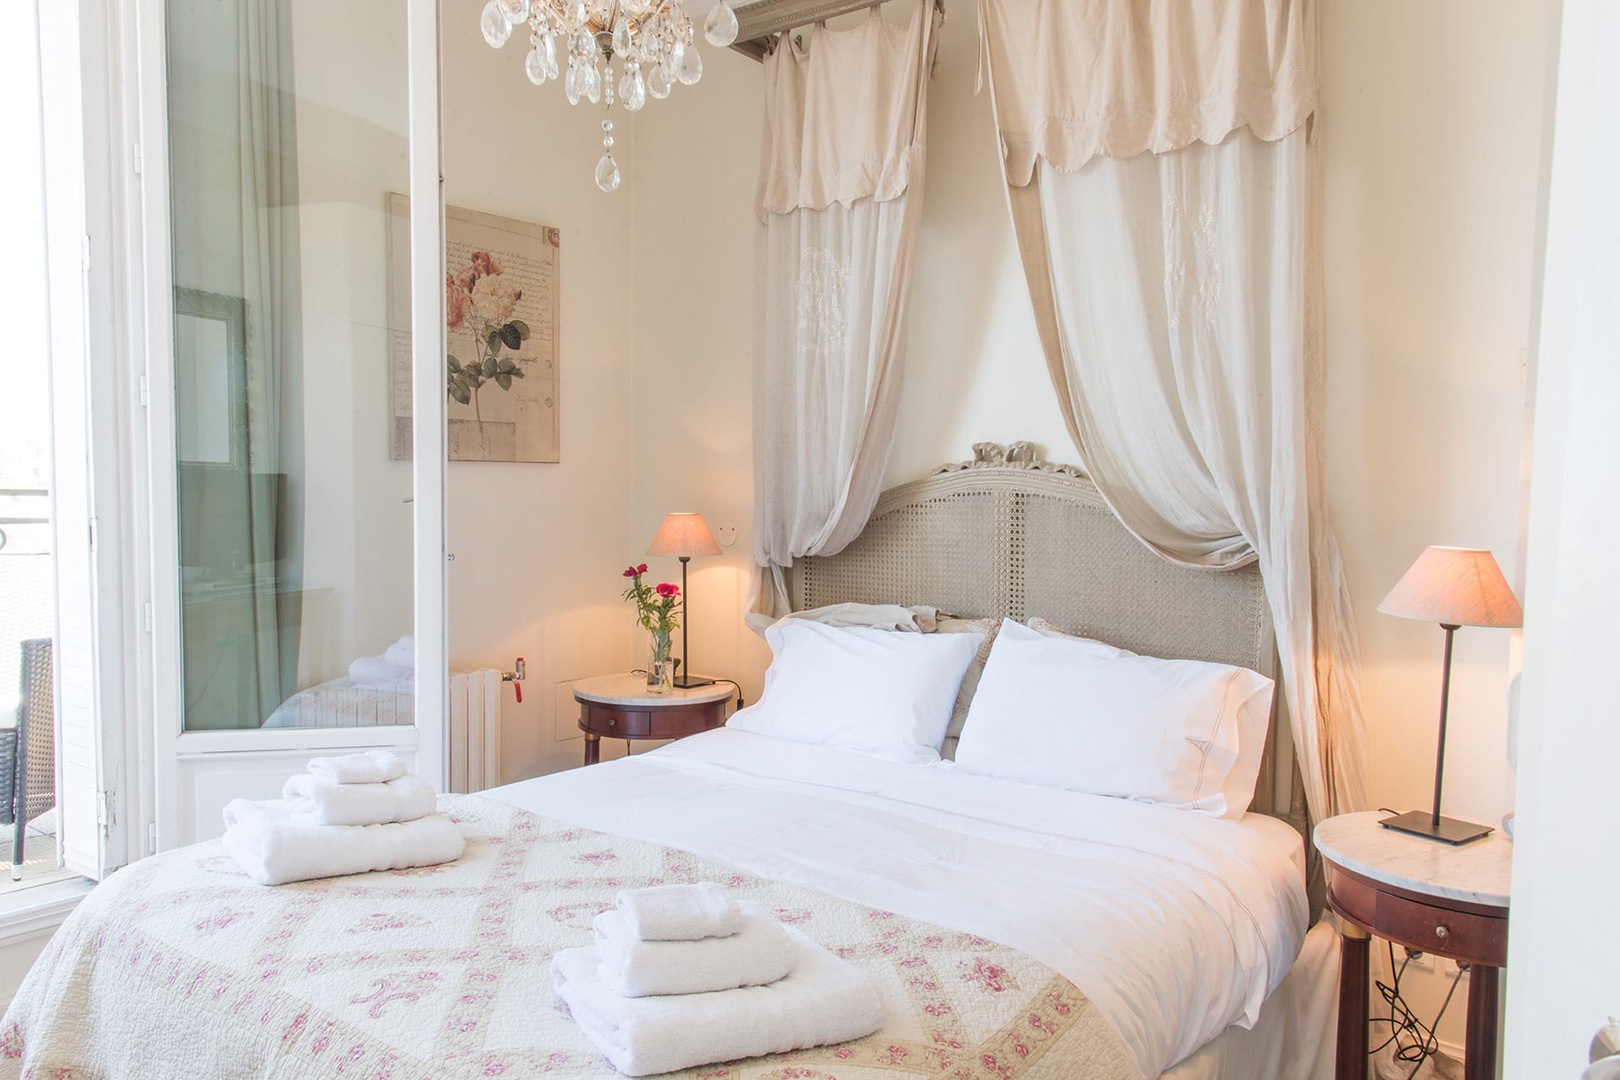 Relax in the romantic bedrooms, decorated with a French flair.